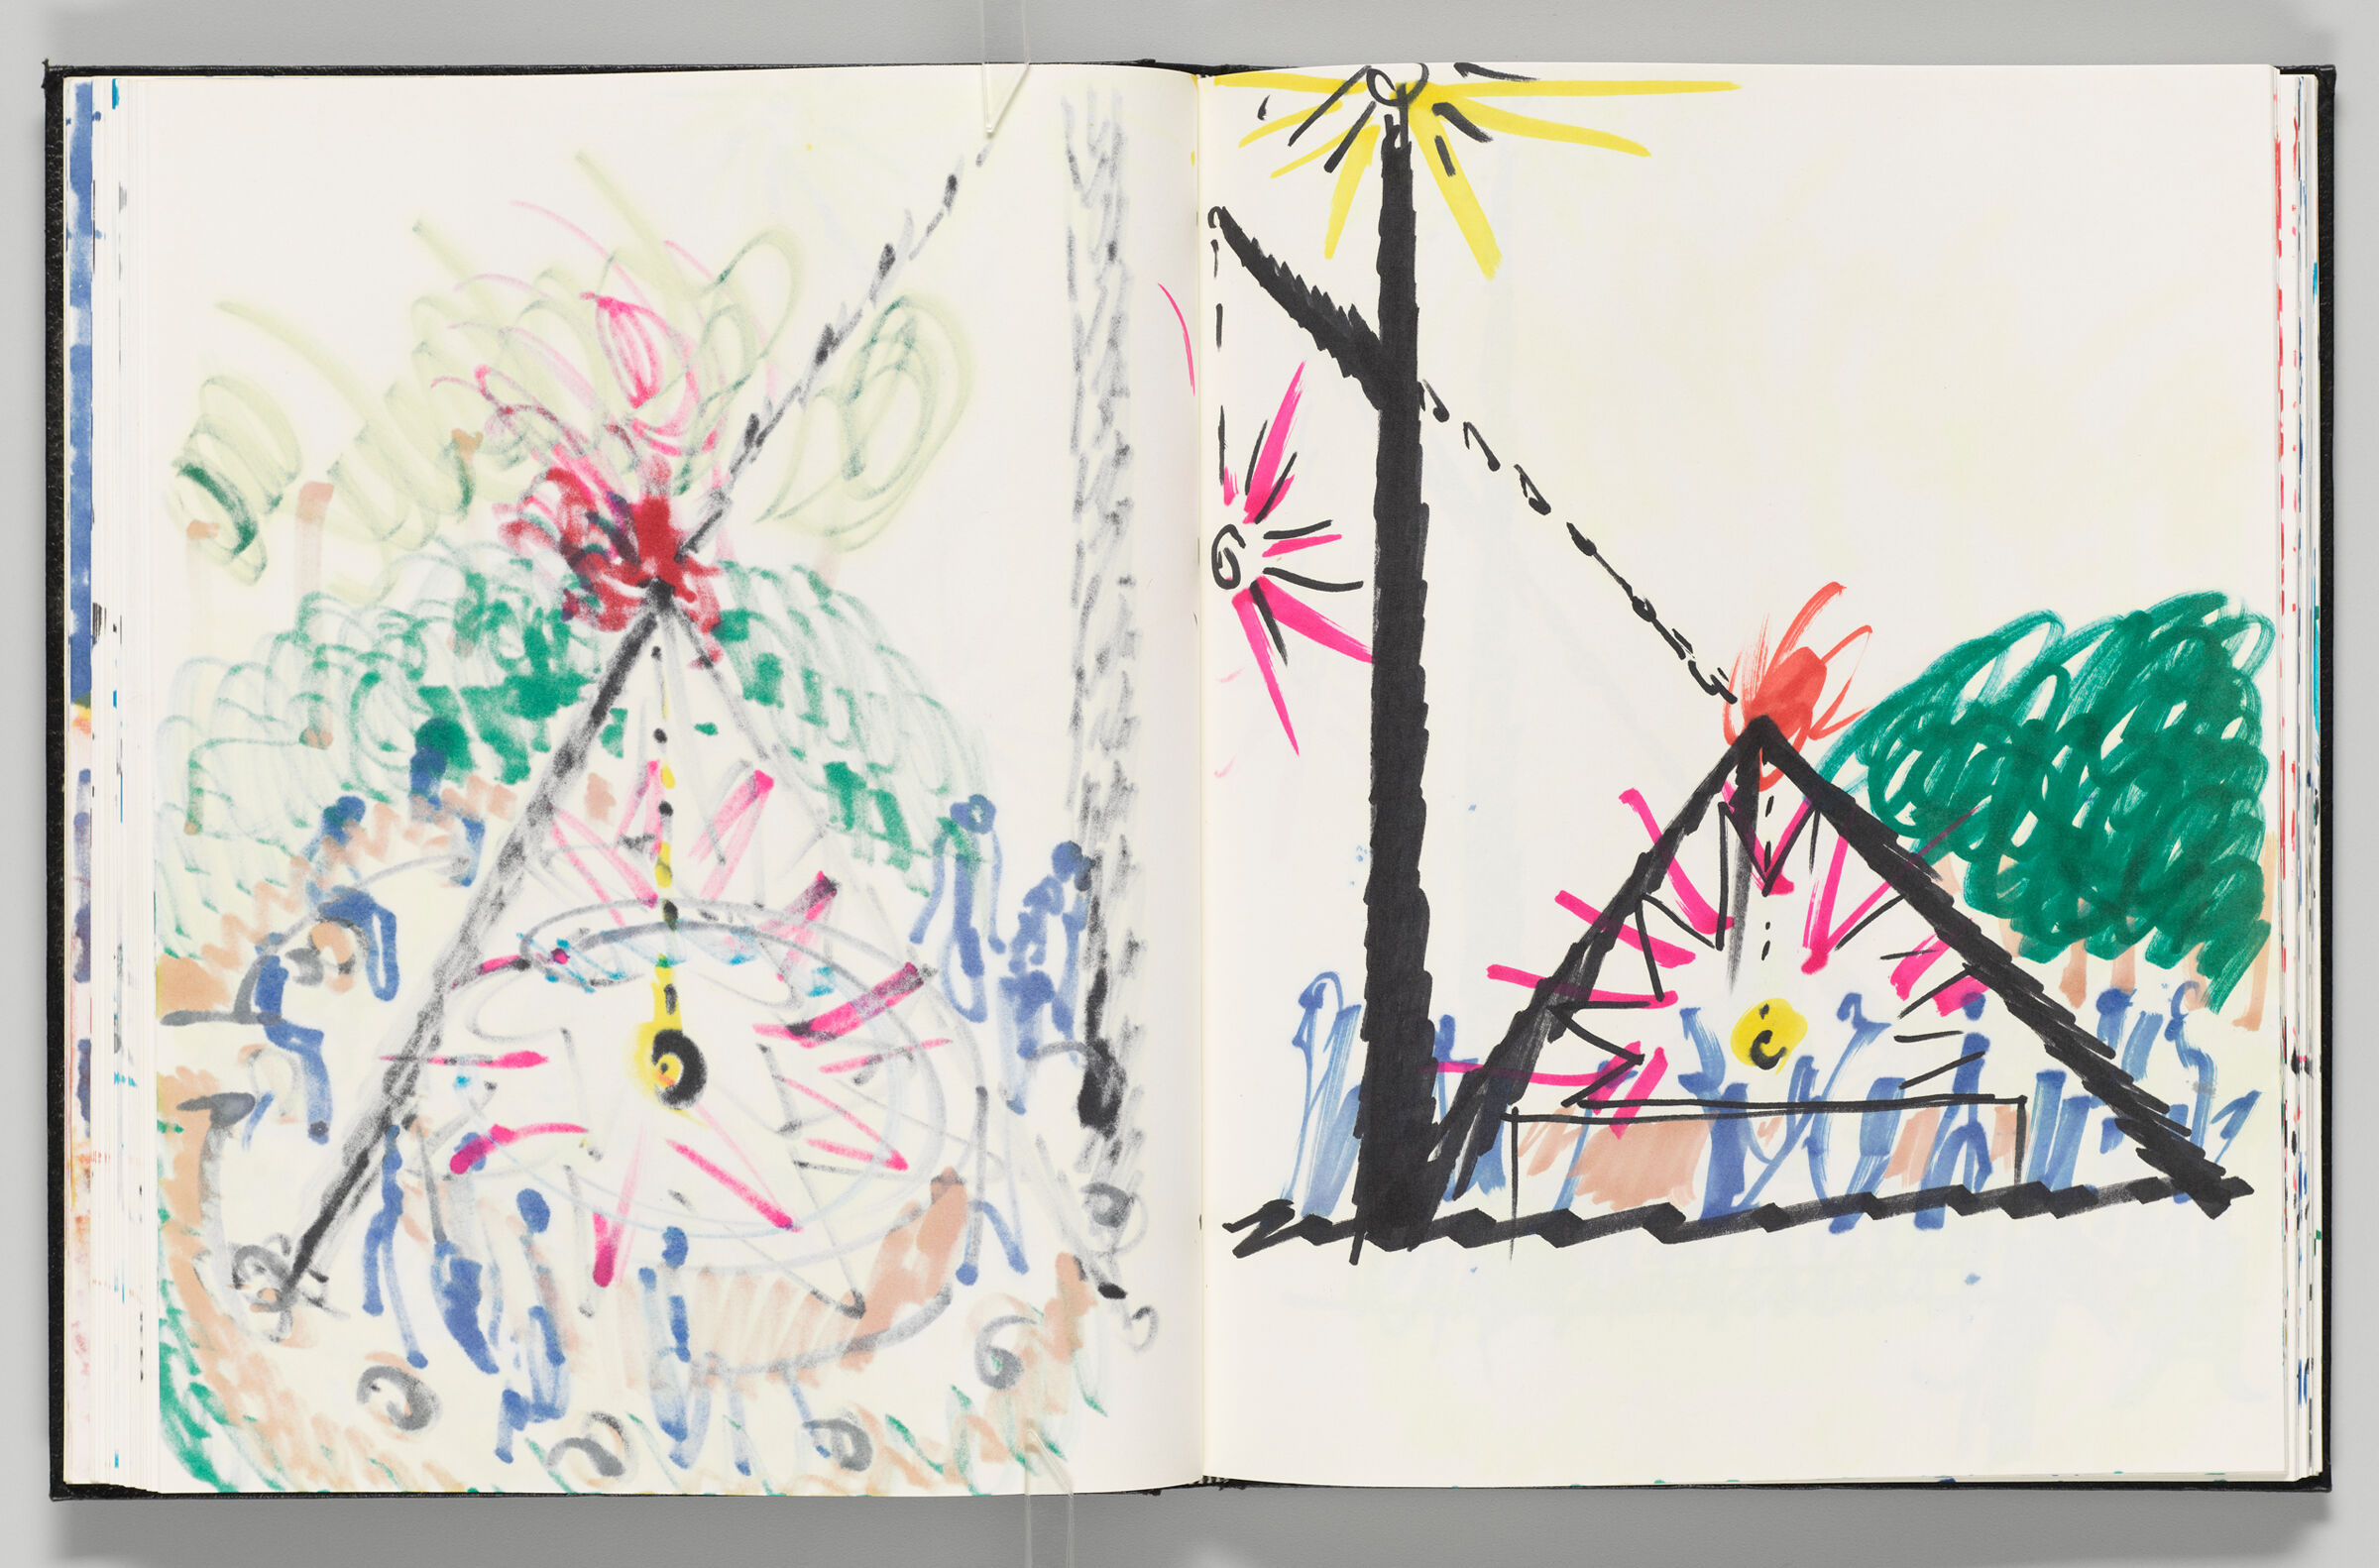 Untitled (Bleed-Through Of Previous Page, Left Page); Untitled (Sculpture Design With Figures, Right Page)